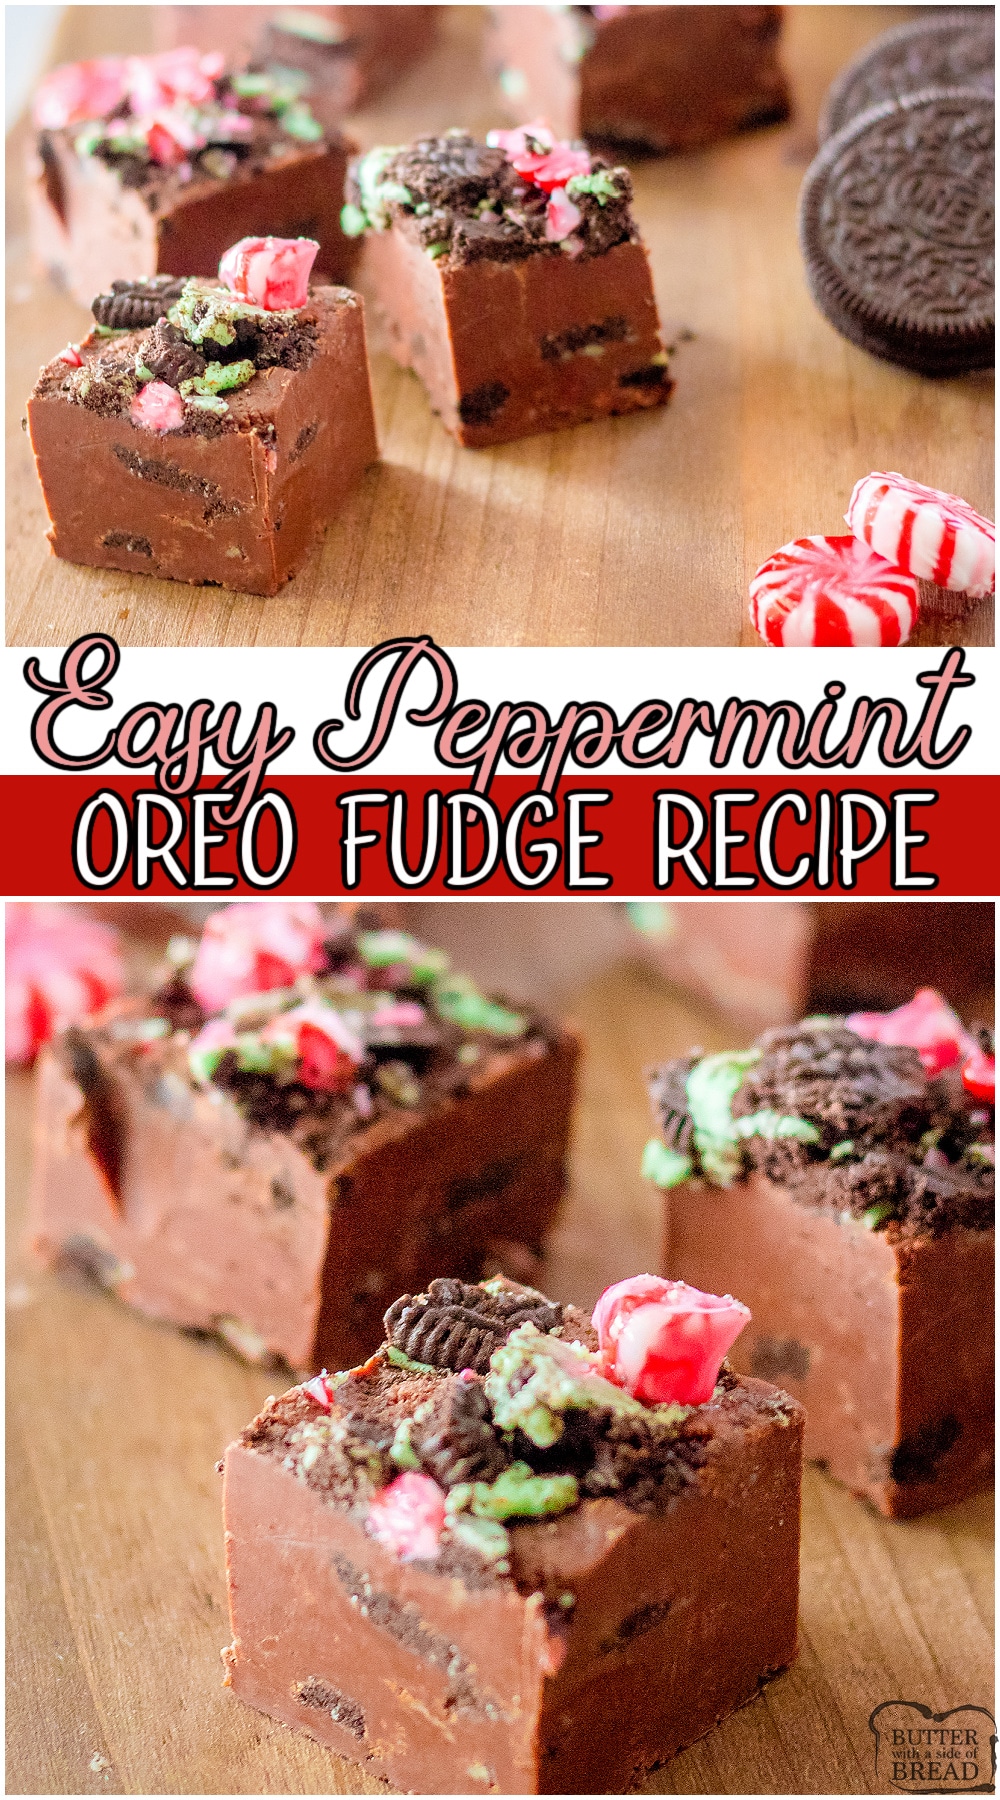 Peppermint oreo fudge recipe made with just 4 ingredients ~ Oreo's, chocolate chips, peppermint candy & sweetened condensed milk! Chocolatey peppermint fudge recipe with great flavor & is so easy to make!